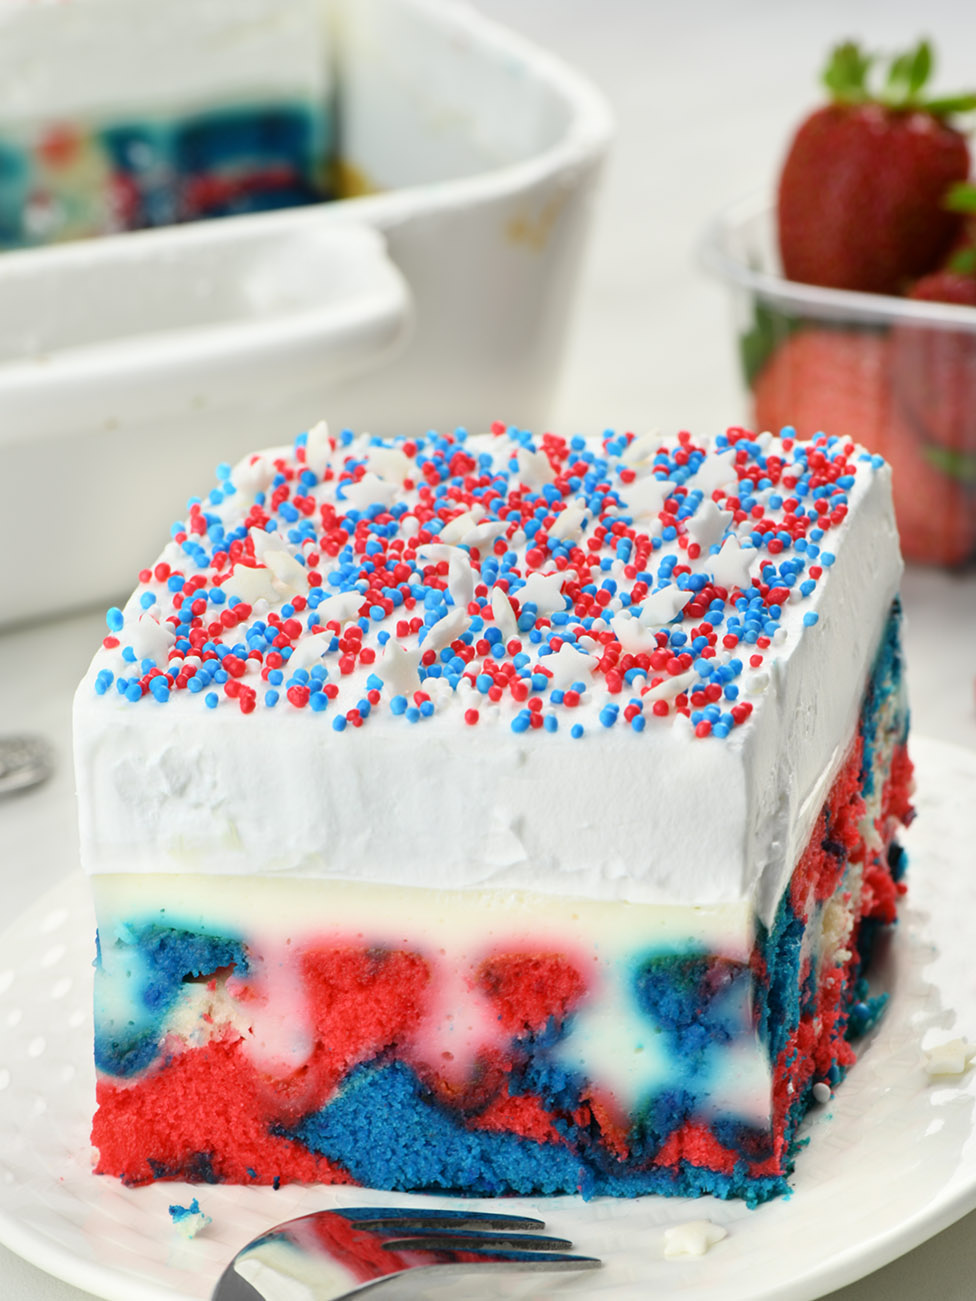 Red, white and blue Patriotic Poke Cake,  on a white plate garnished with red, white and blue funfetti,